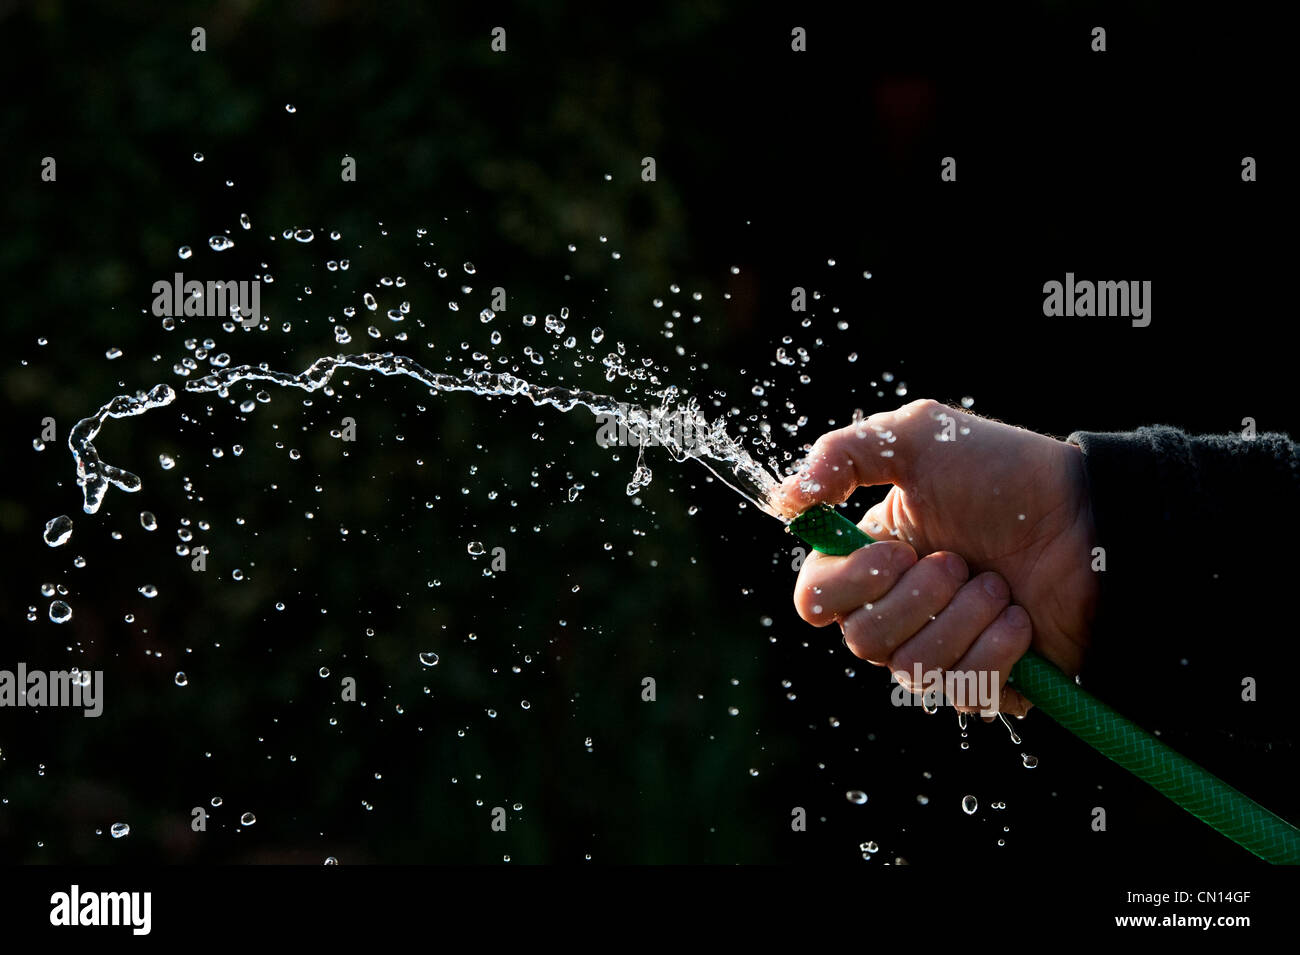 Hand spraying water with hosepipe against a dark background Stock Photo